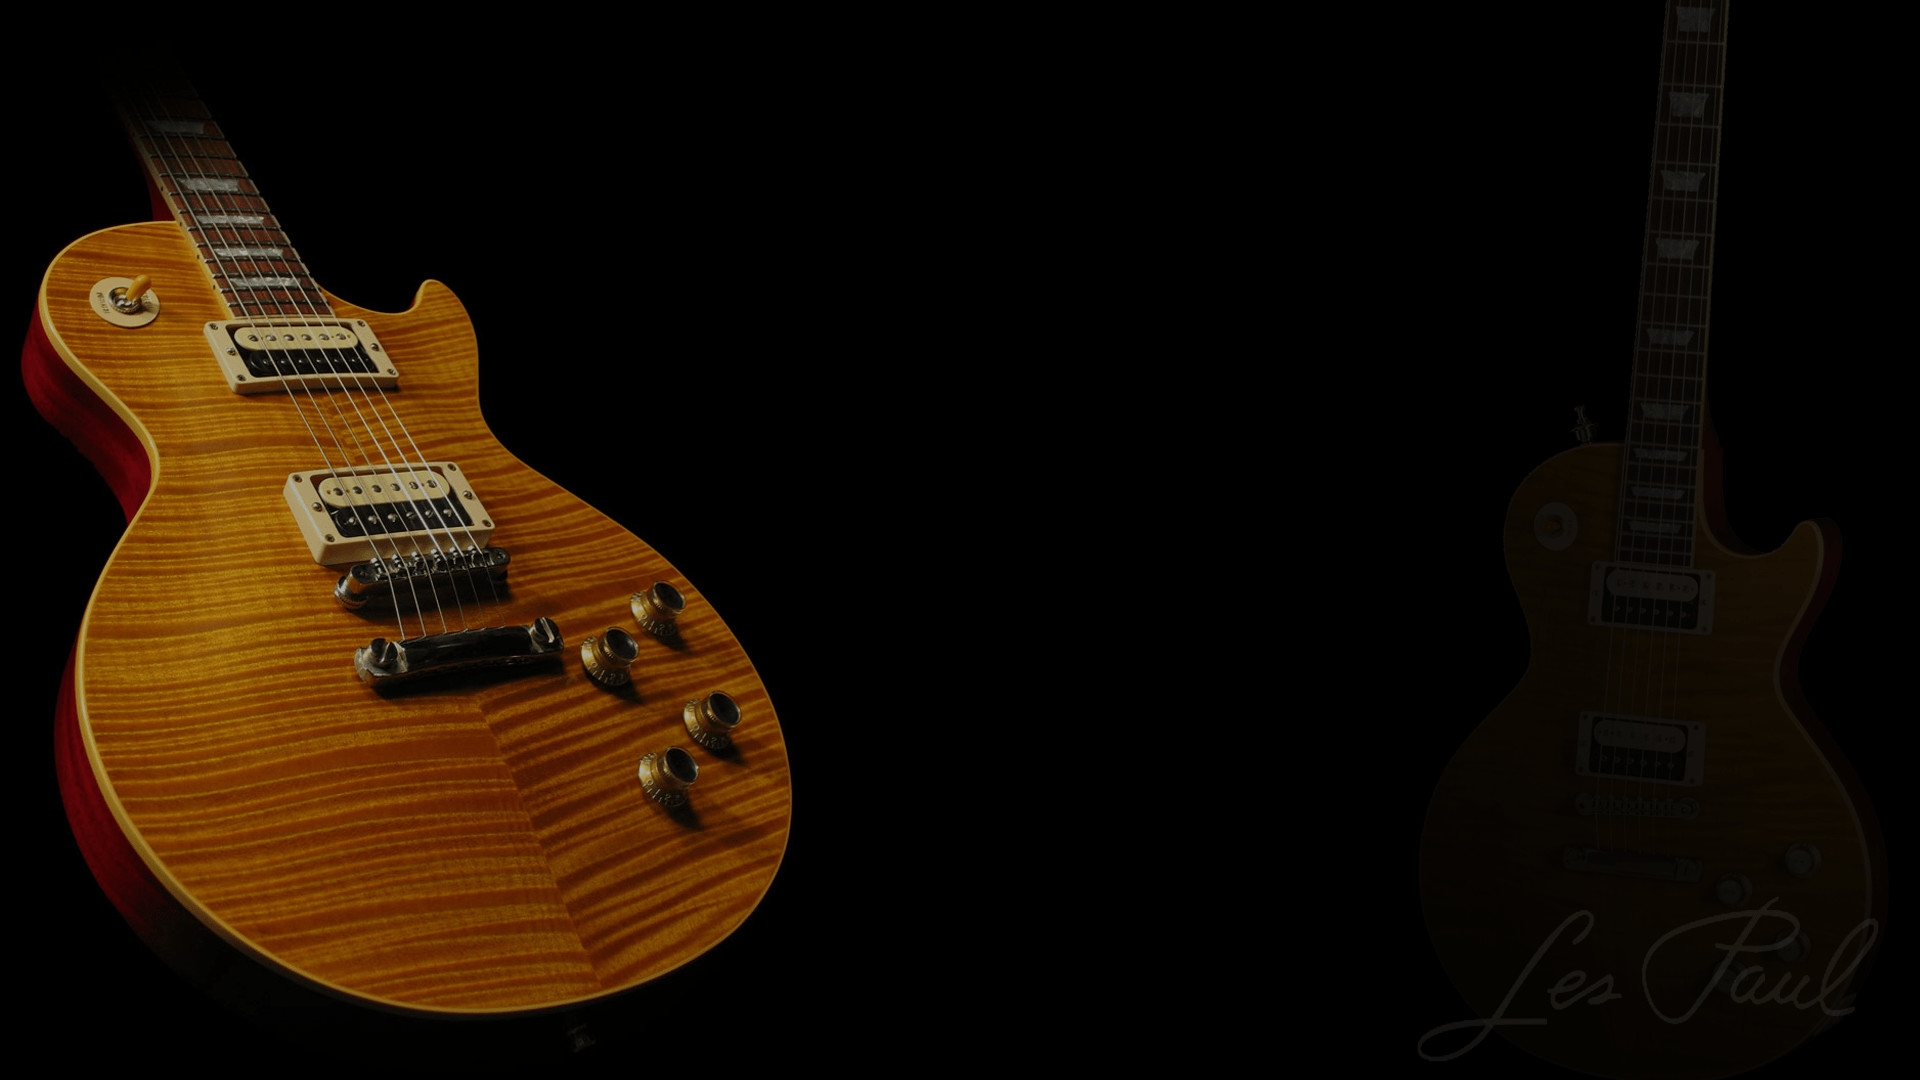 1920x1080 Gibson Les Paul Wallpapers - Wallpaper Cave | Images Wallpapers .